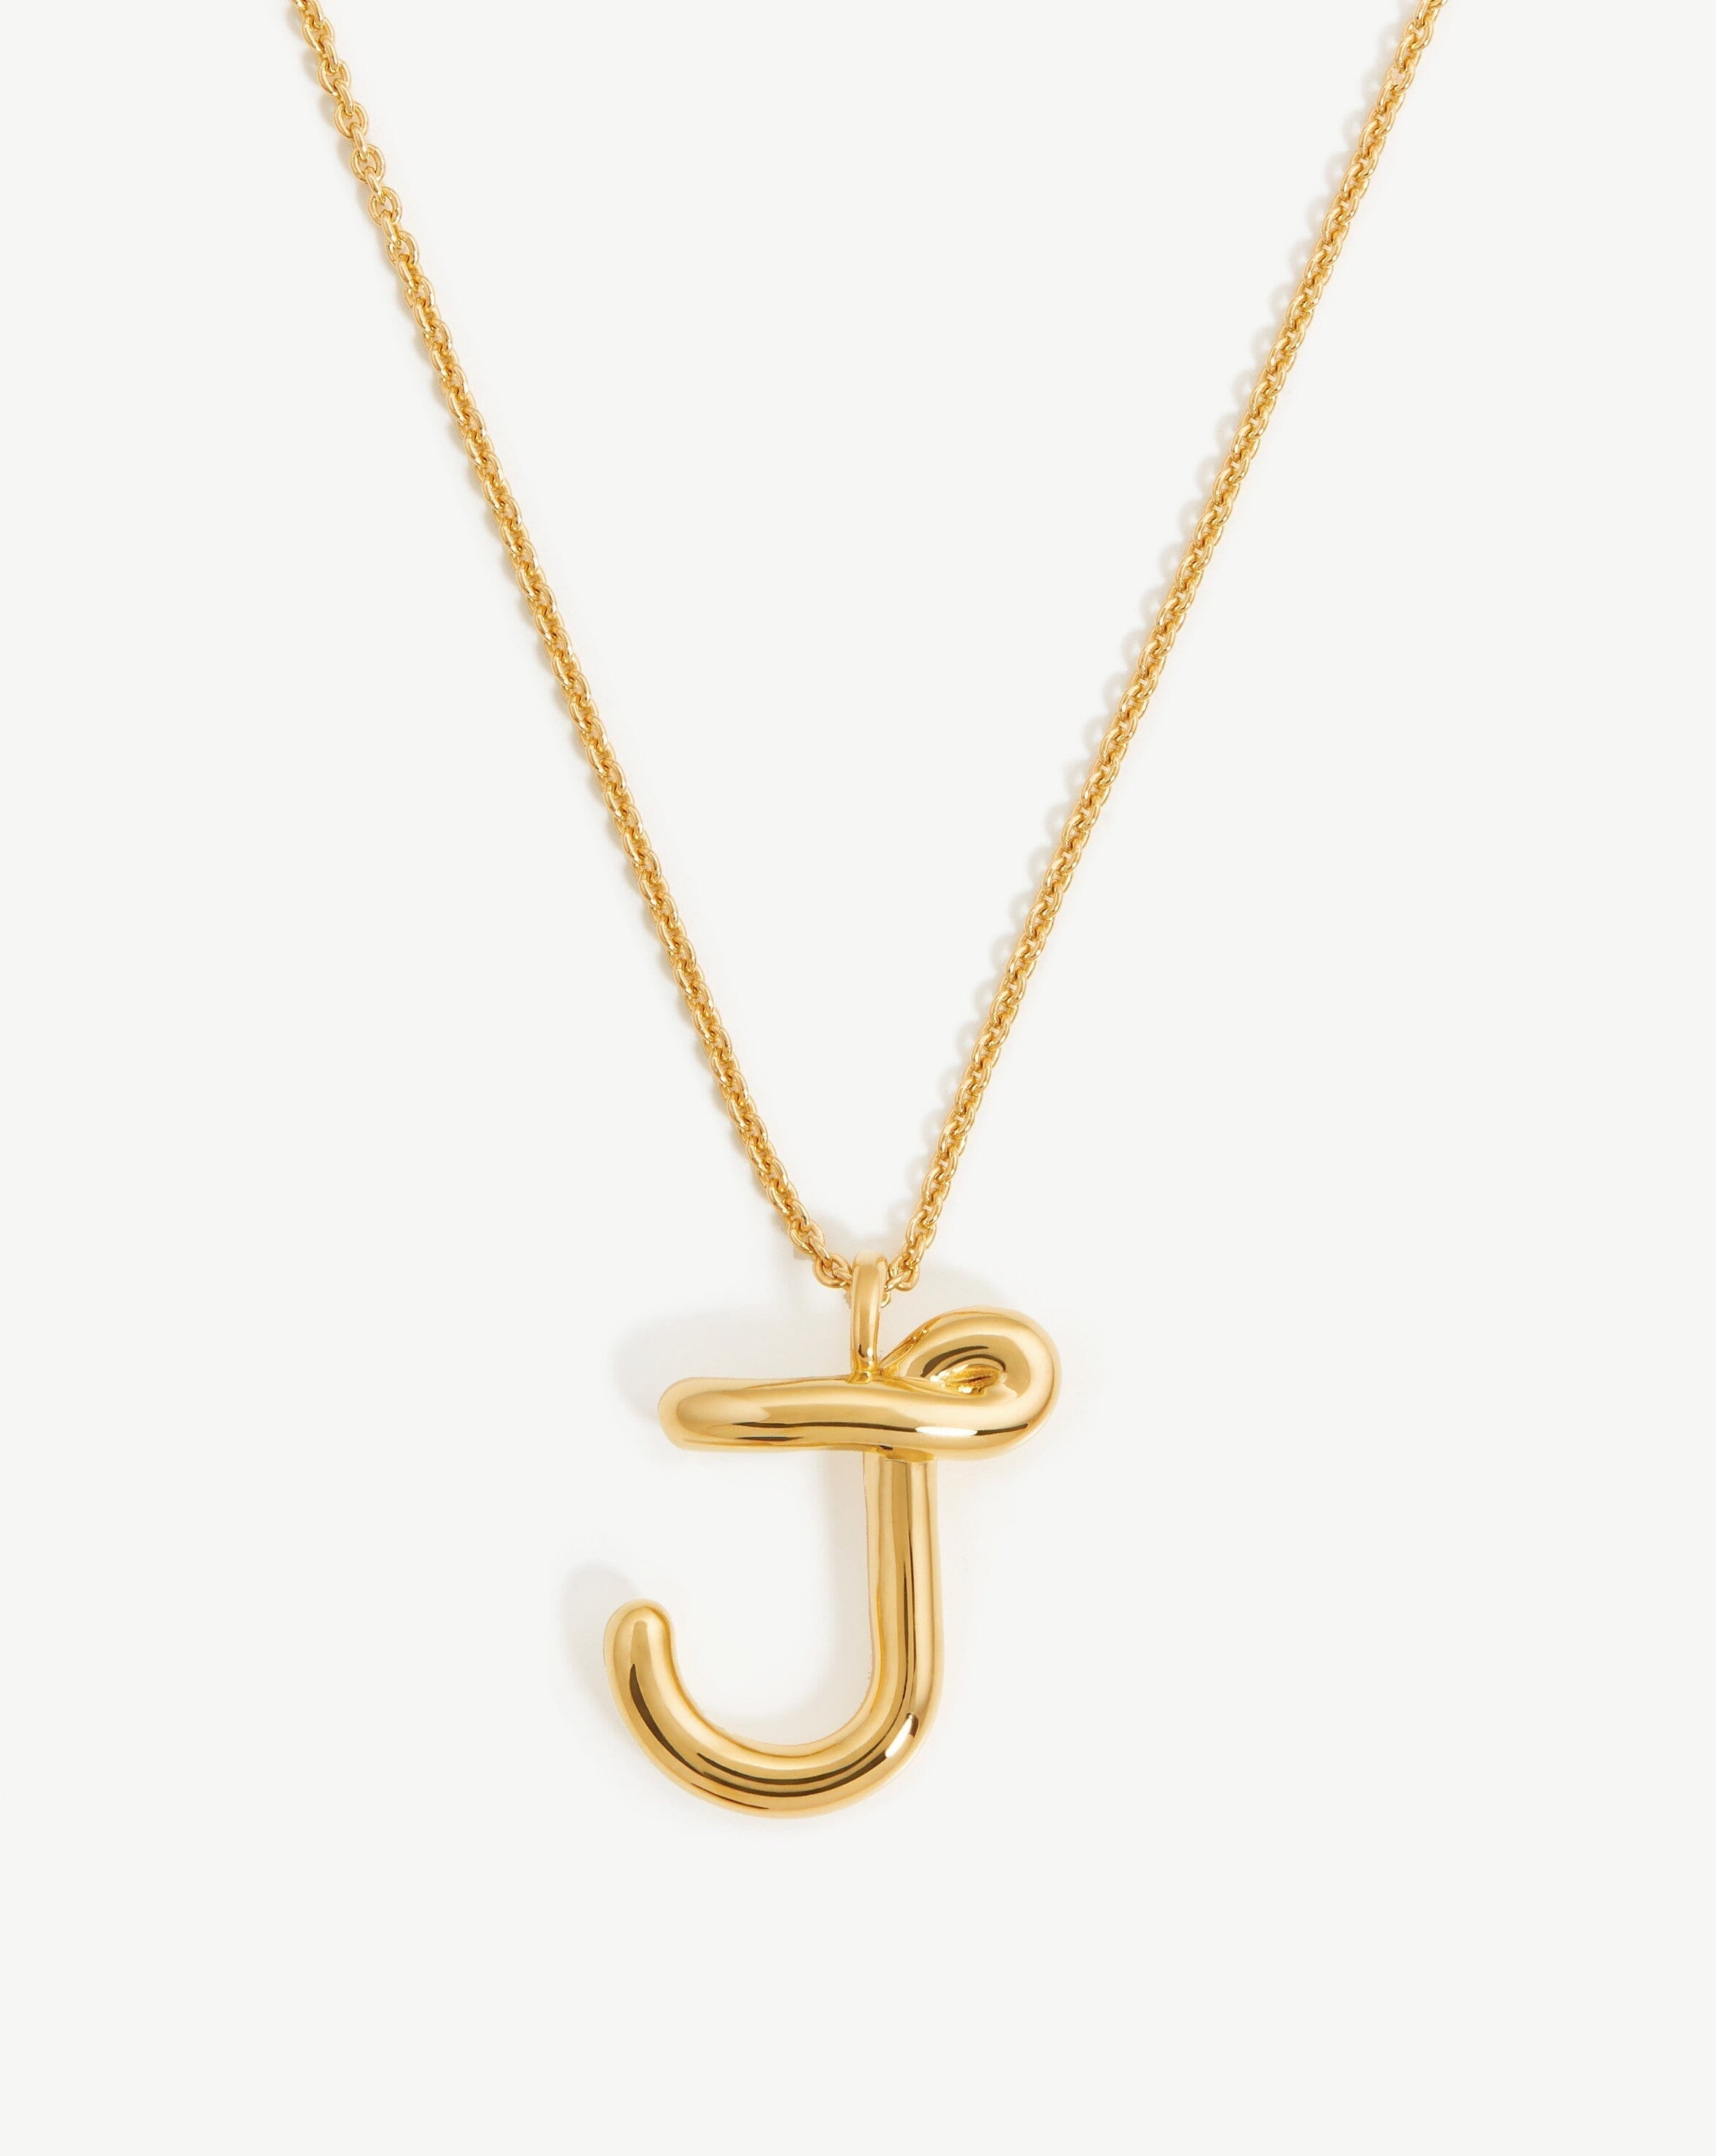 The Enamel Initial Pendant - Metal : Gold Vermeil - Letter : S - The M Jewelers